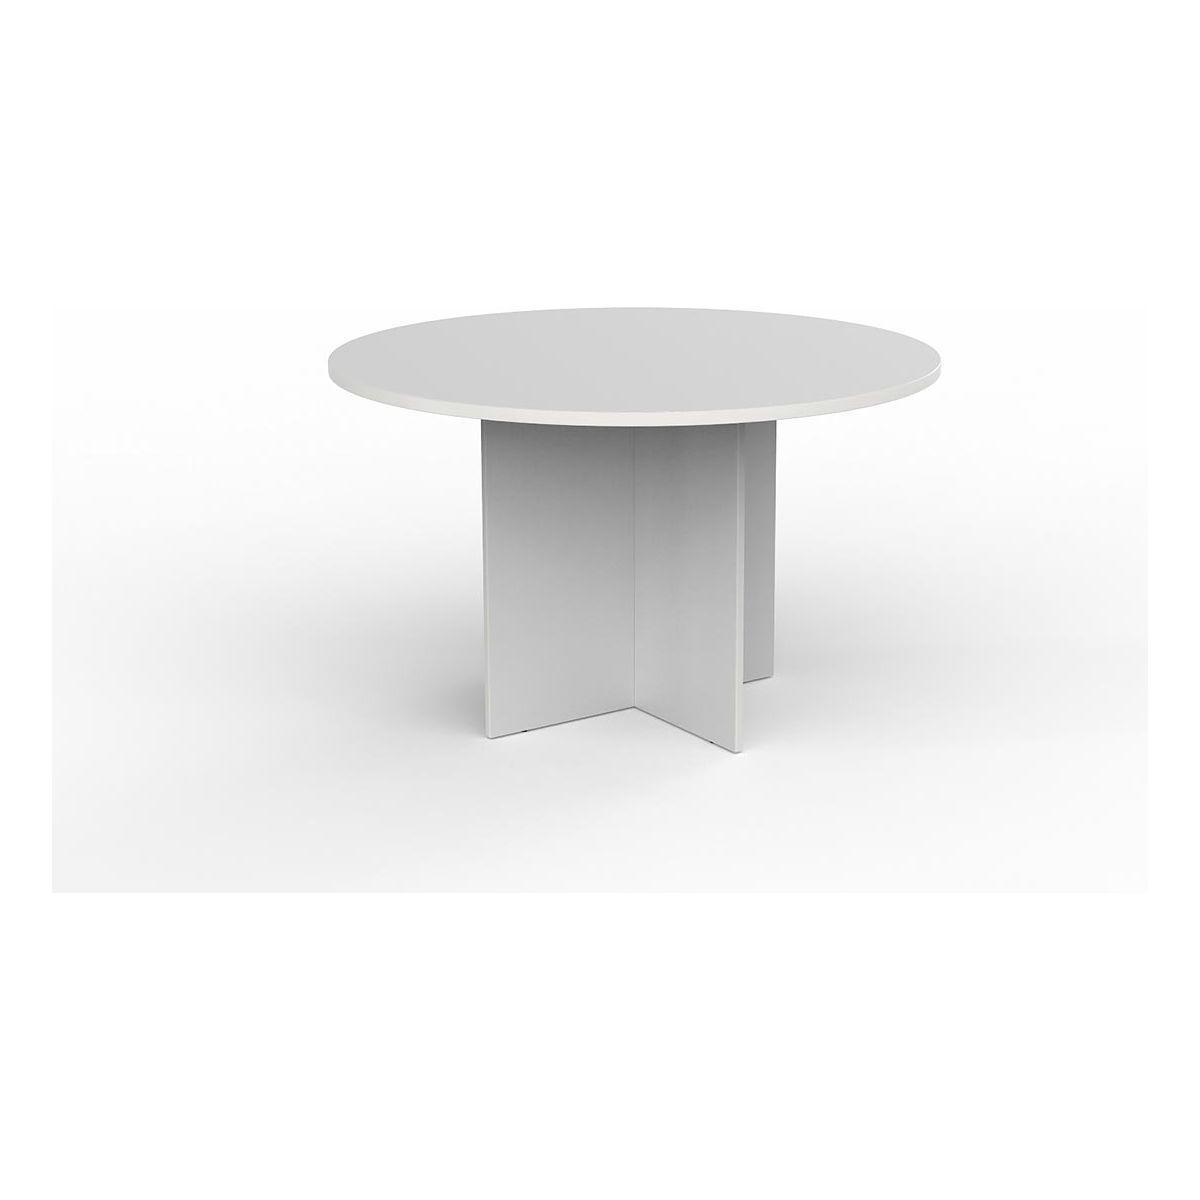 EkoSystem Round Meeting Table - Office Furniture Company 